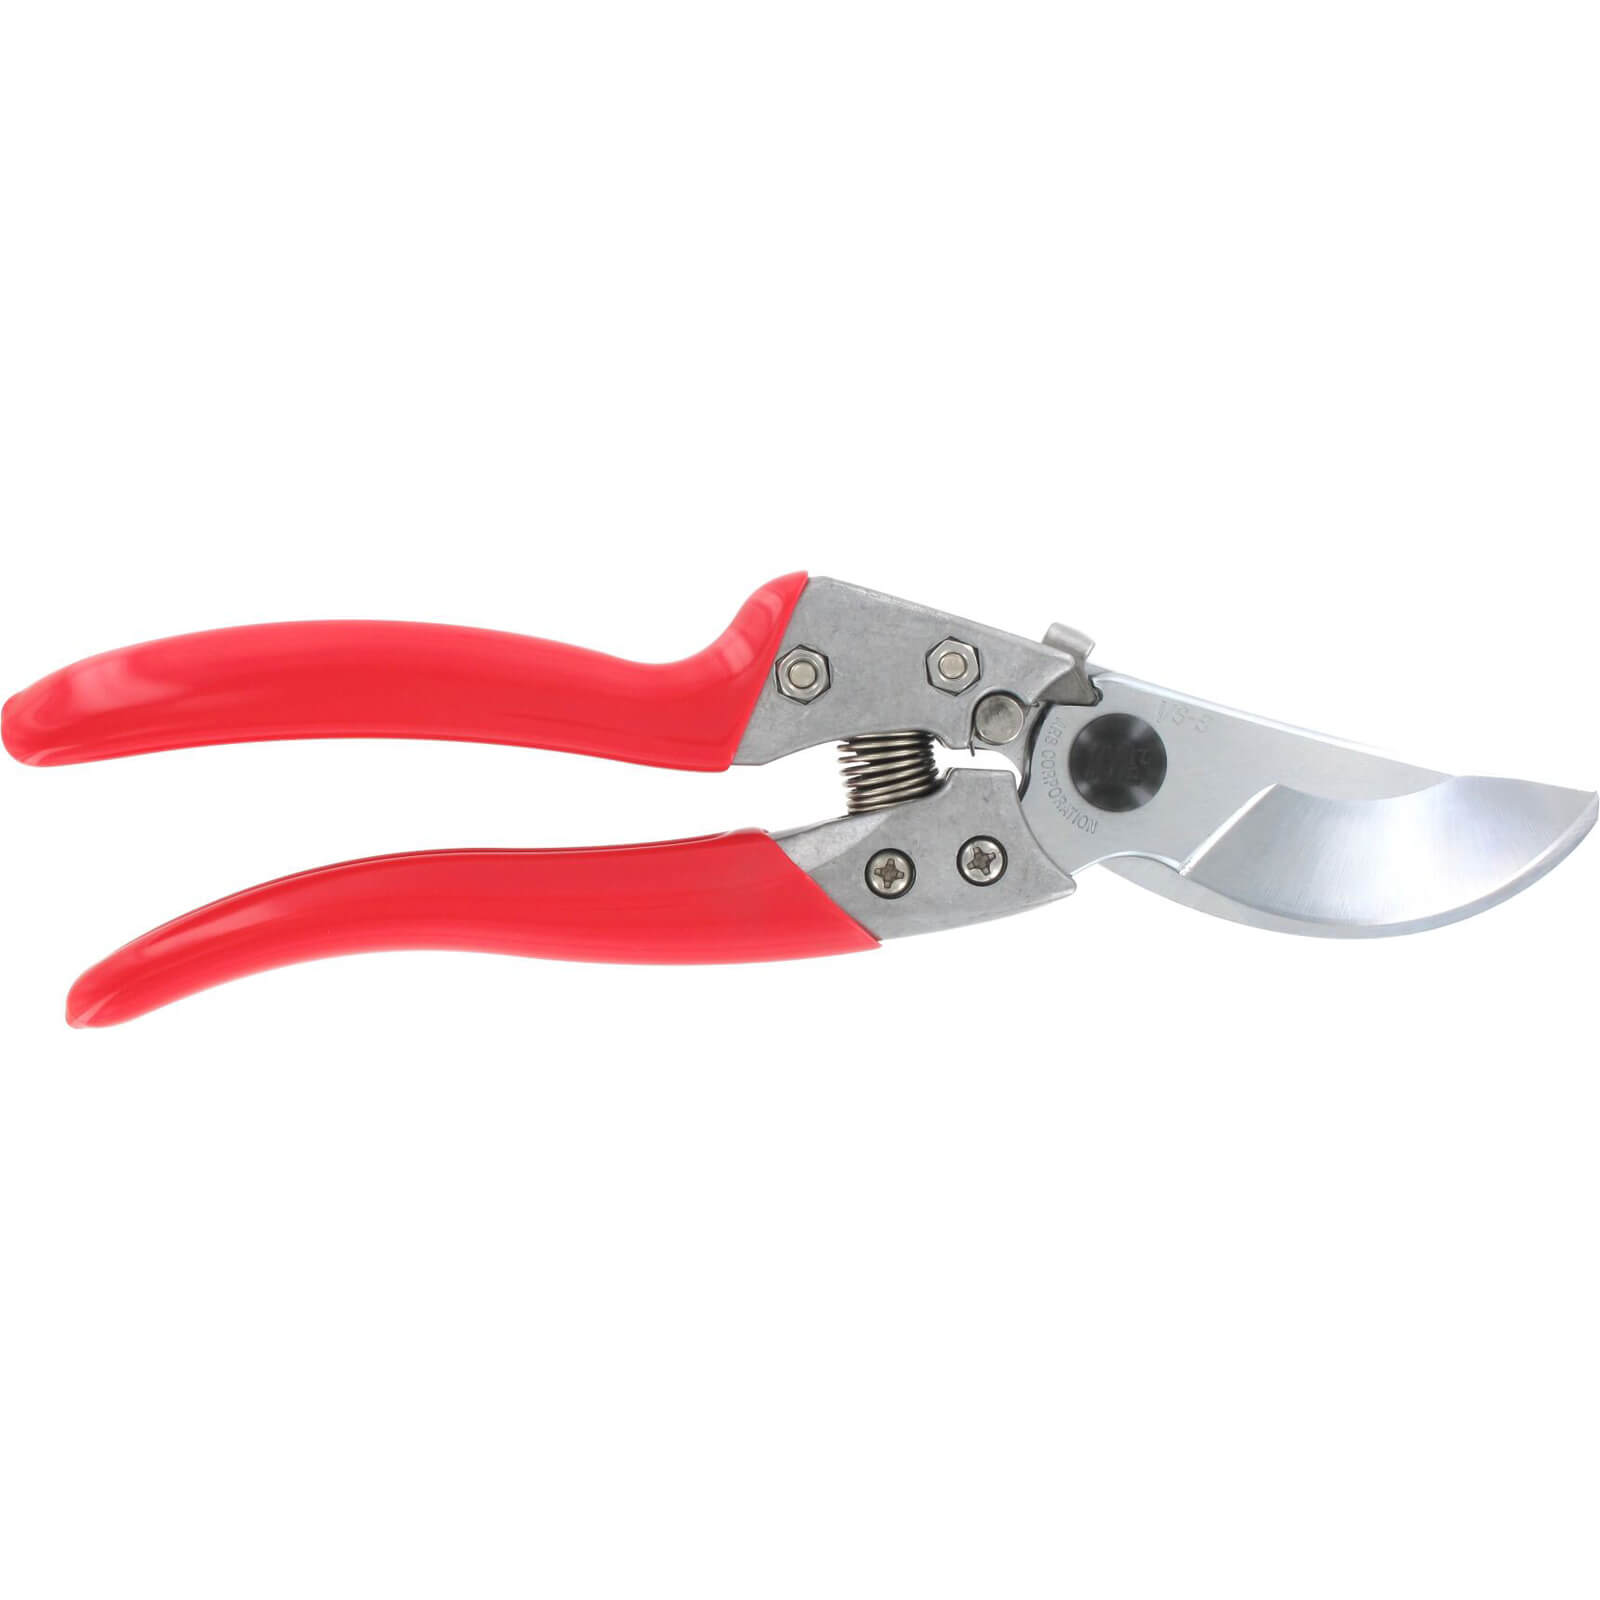 Image of ARS VS-XZ Single Hand Locking Bypass Secateurs 230mm